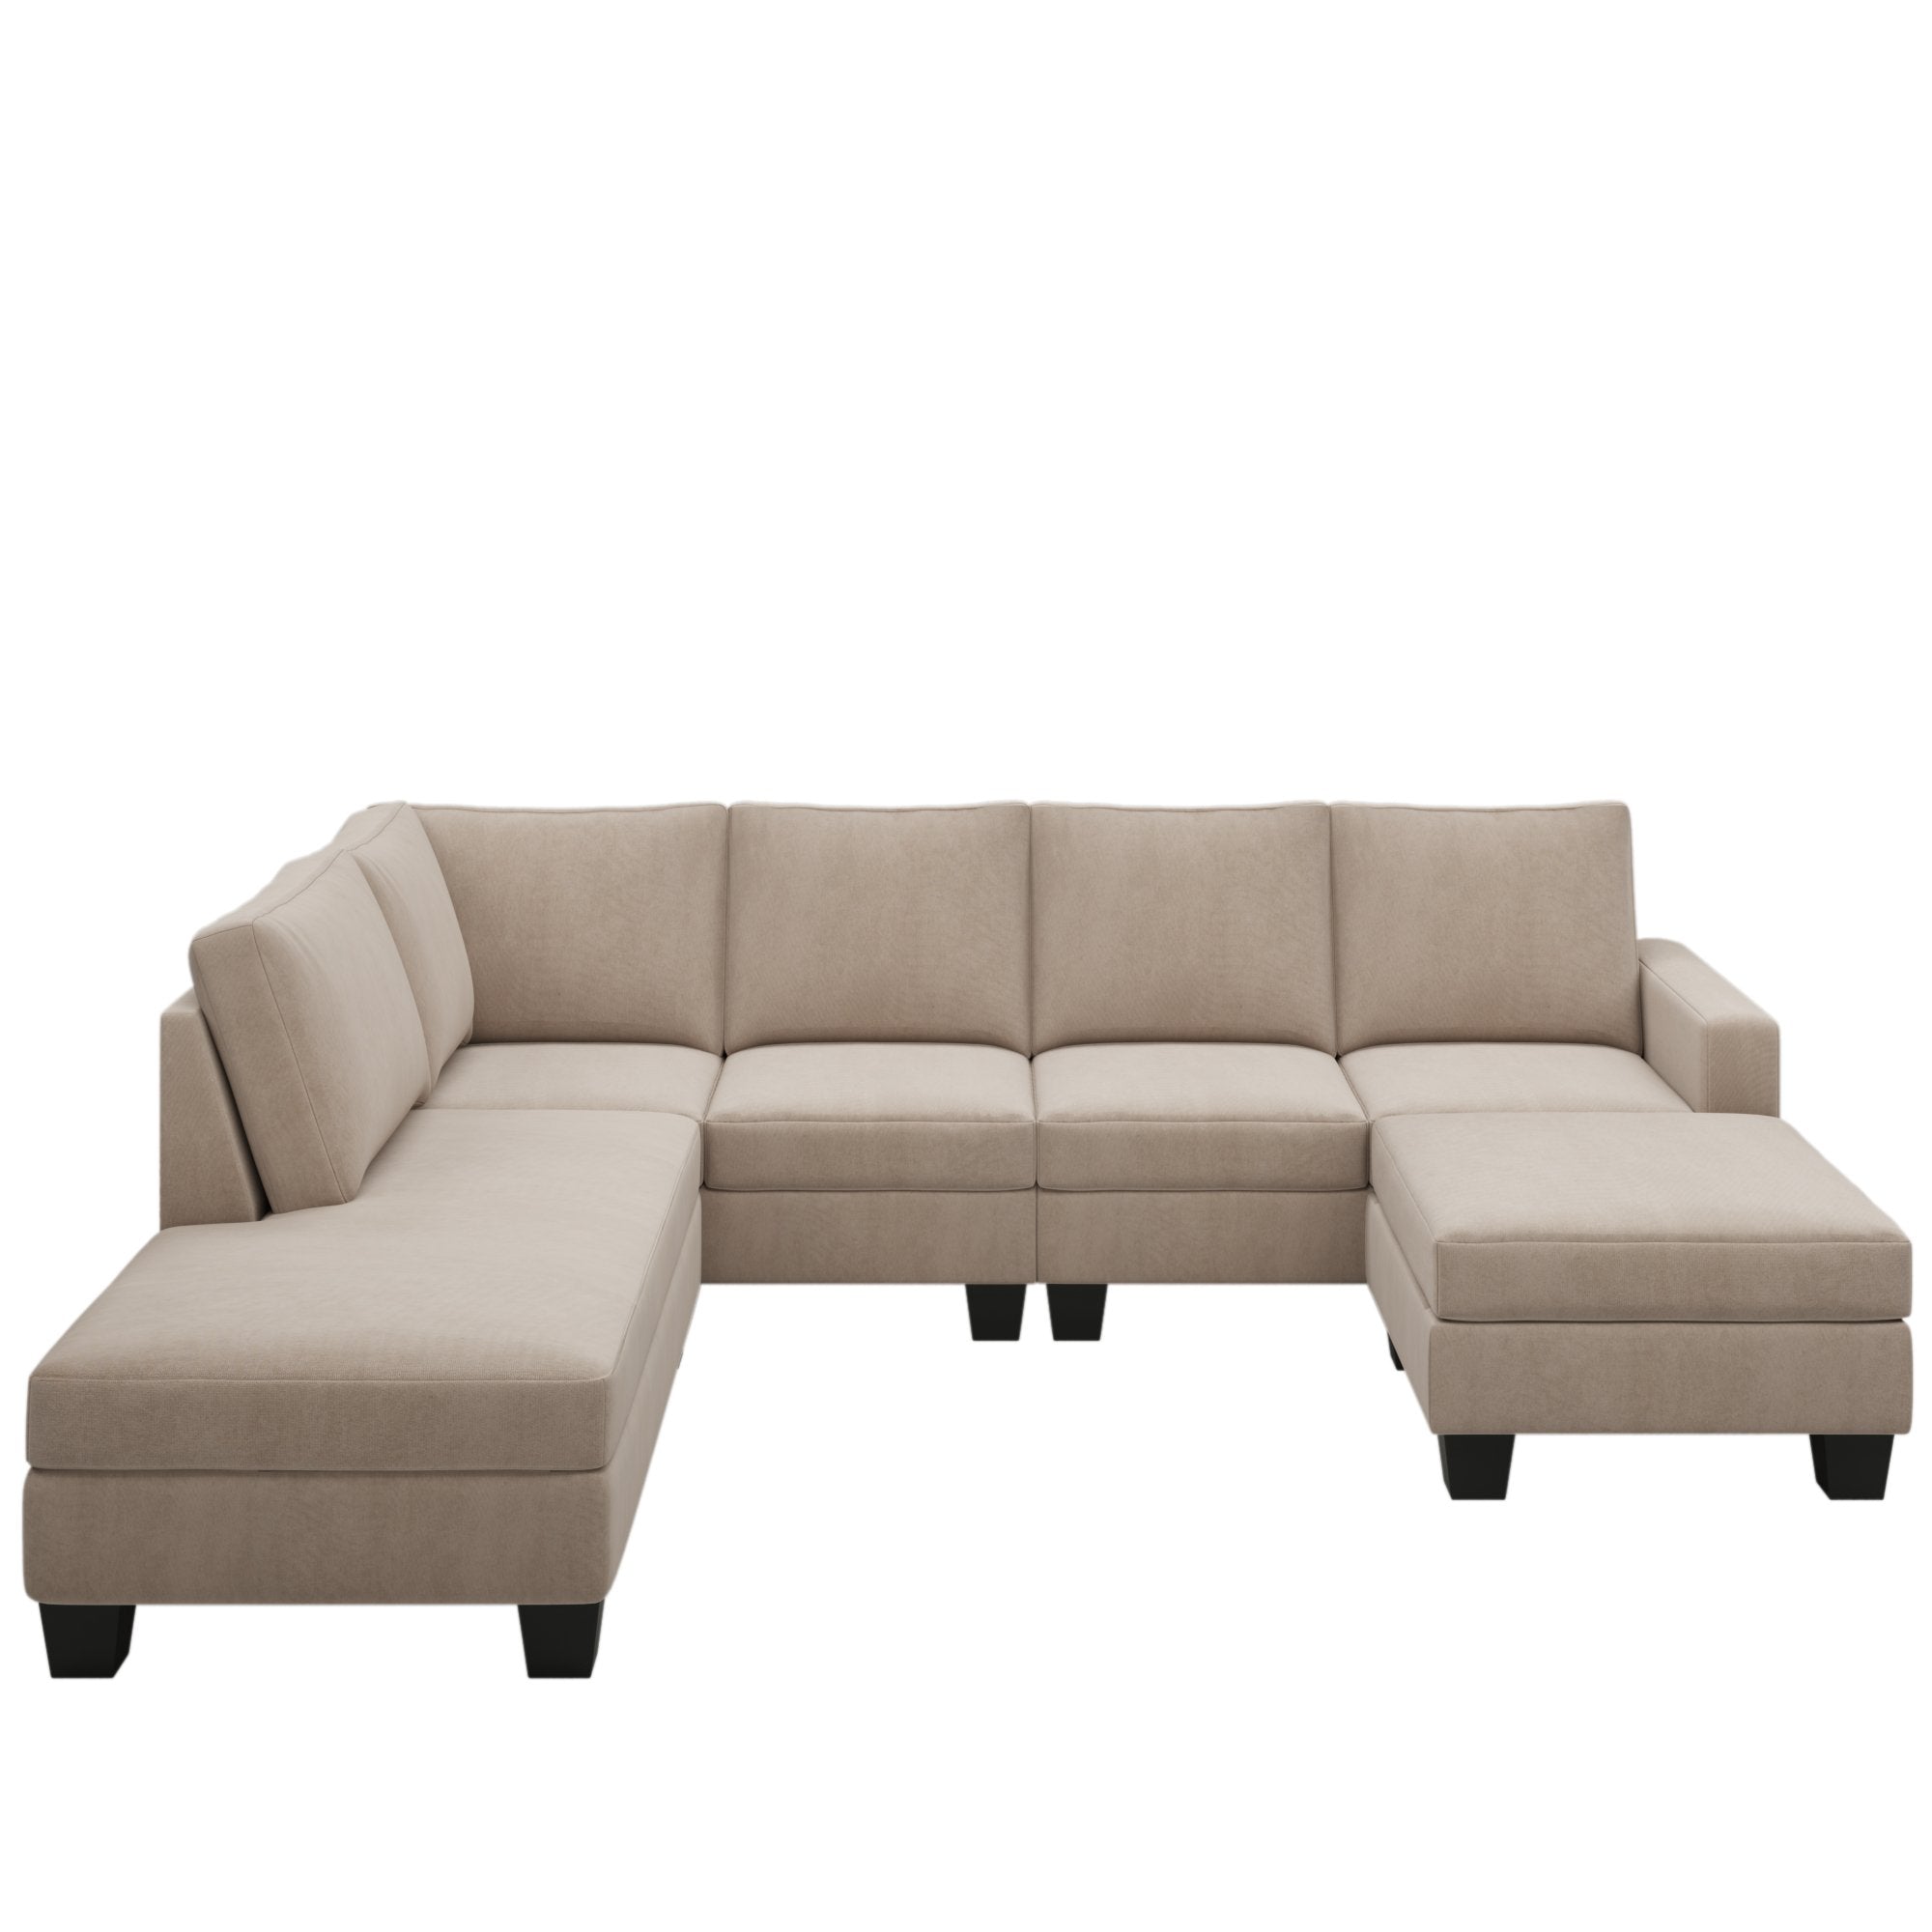 110*86.5*36" Textured Fabric Sectional Sofa Set, 4 pieces, U-shaped Sofa With Removable Ottoman, Left-arm Facing Chaise, Grey-Boyel Living